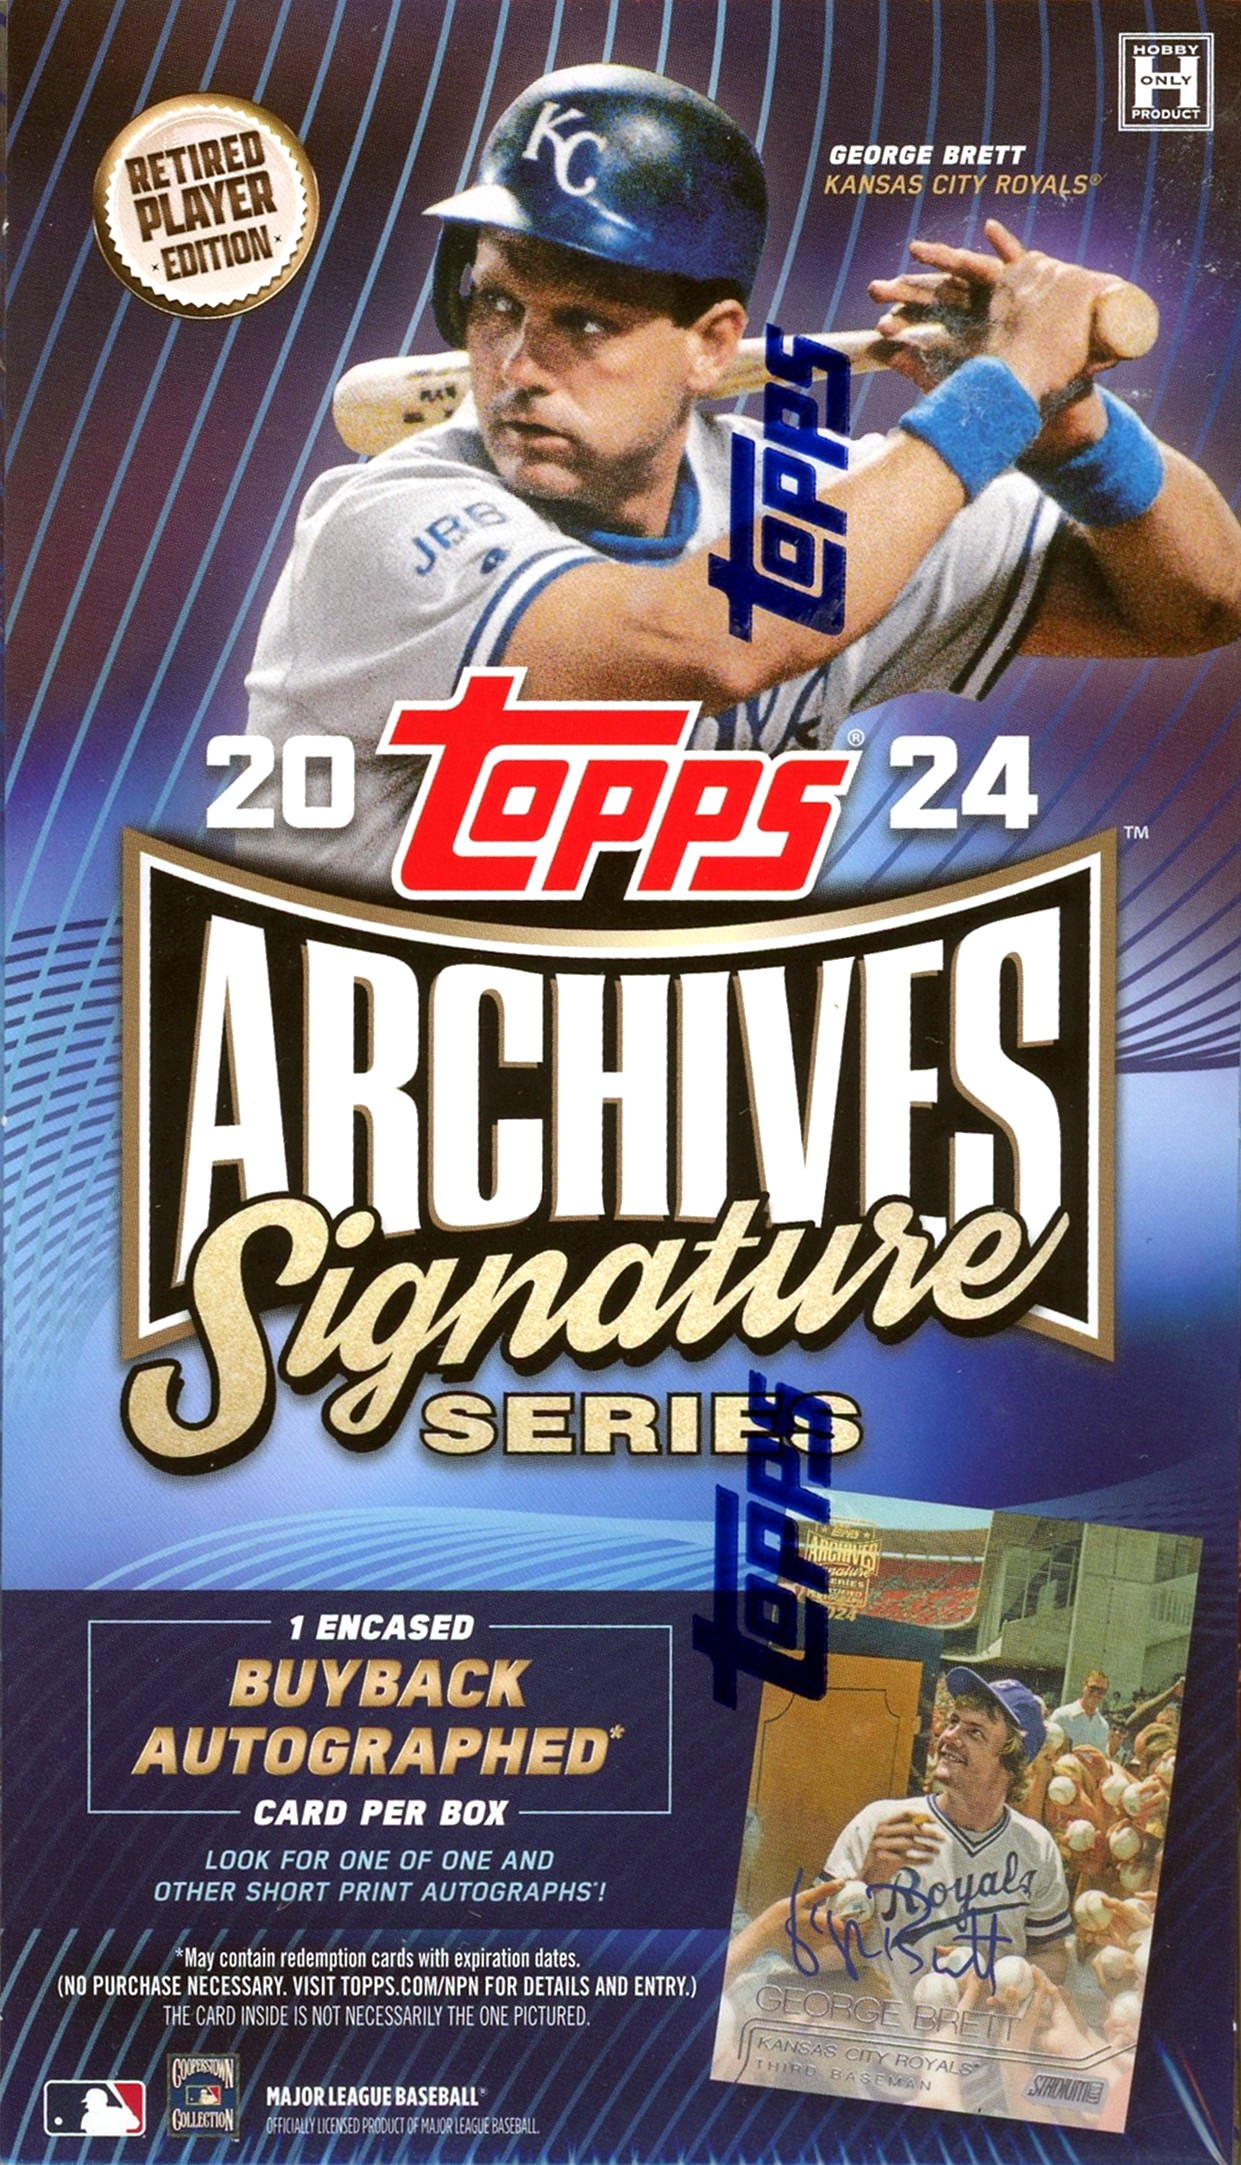 ⚾ MLB 2024 TOPPS ARCHIVES SIGNATURE SERIES – RETIRED PLAYER 